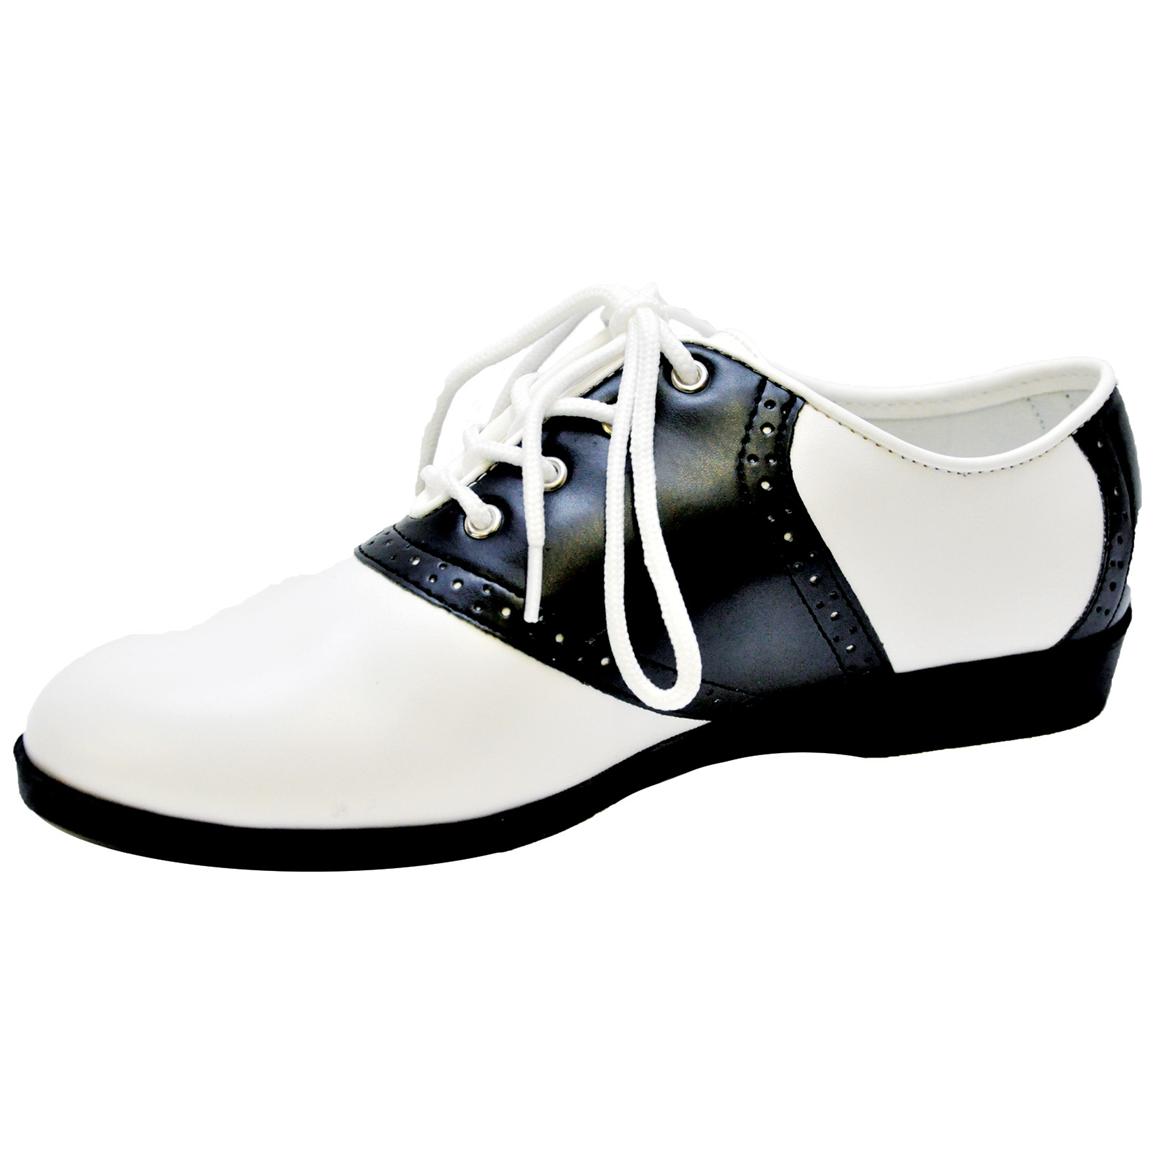 Women's Ellie Shoes® Black and White Saddle Shoes - 194156, Costumes at ...